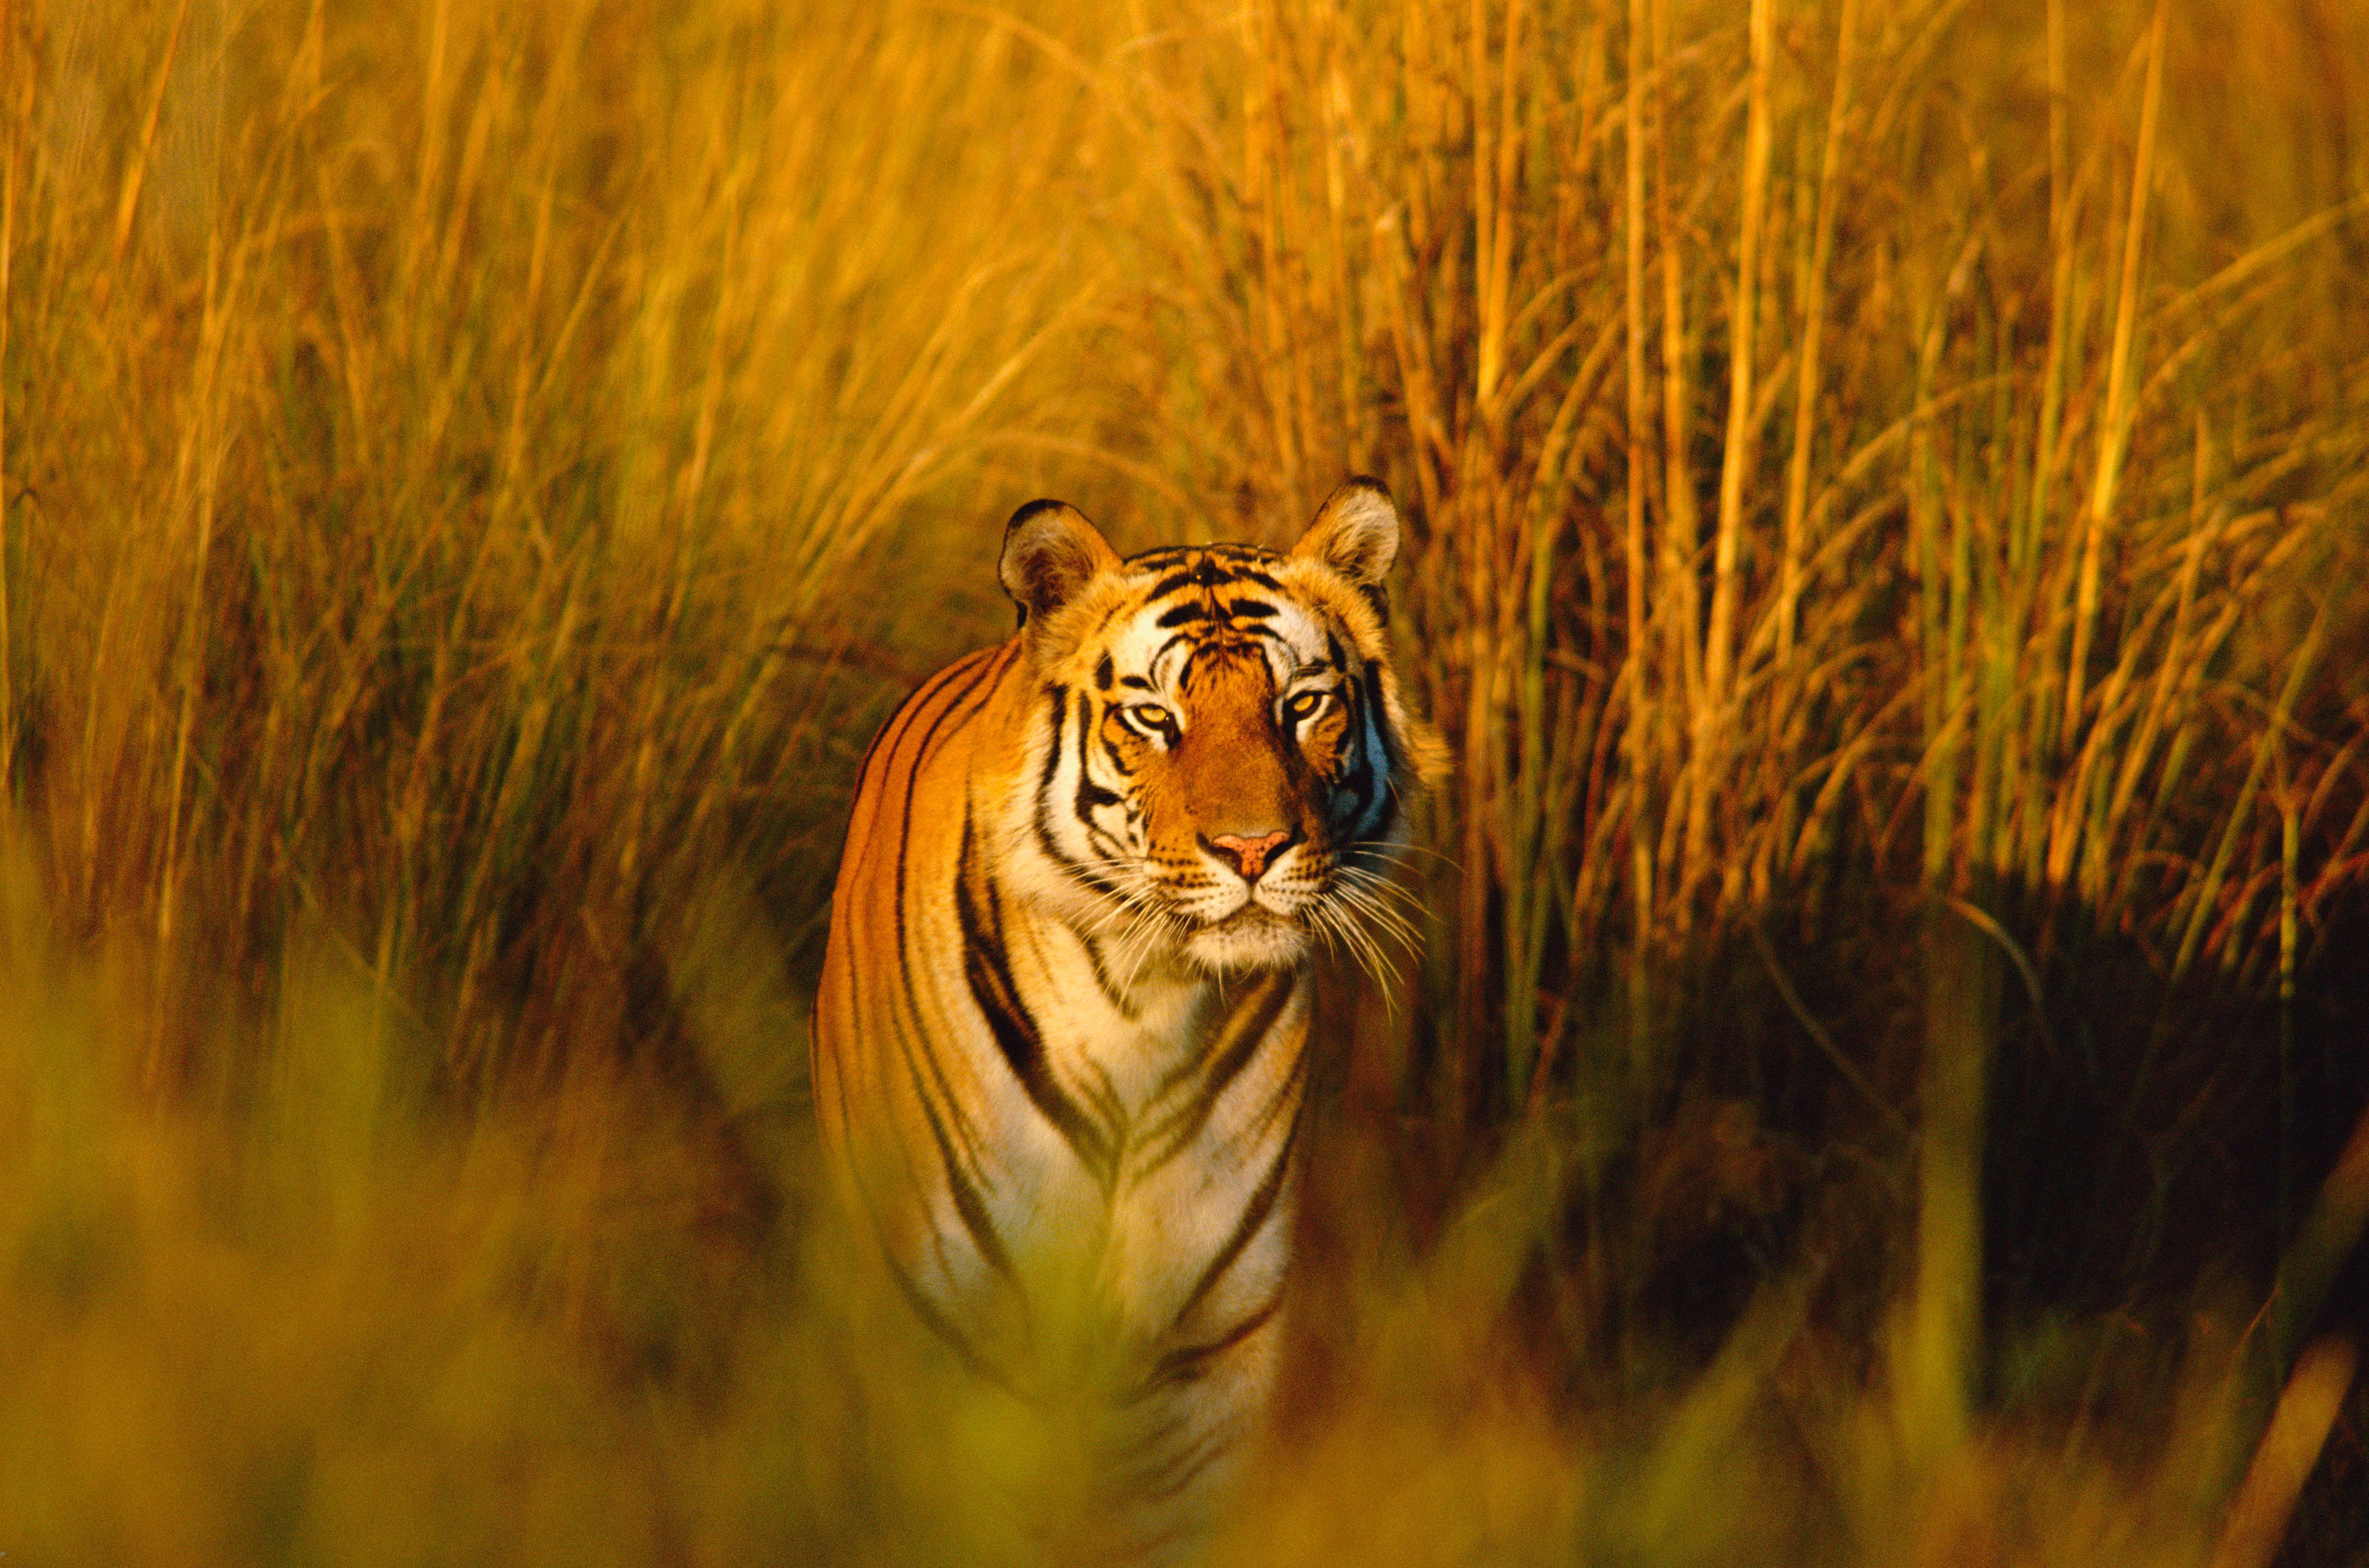 Our new itinerary seeks out the highest densities of bengal tigers. Photo by Francois Savigny/WWF-Canon.